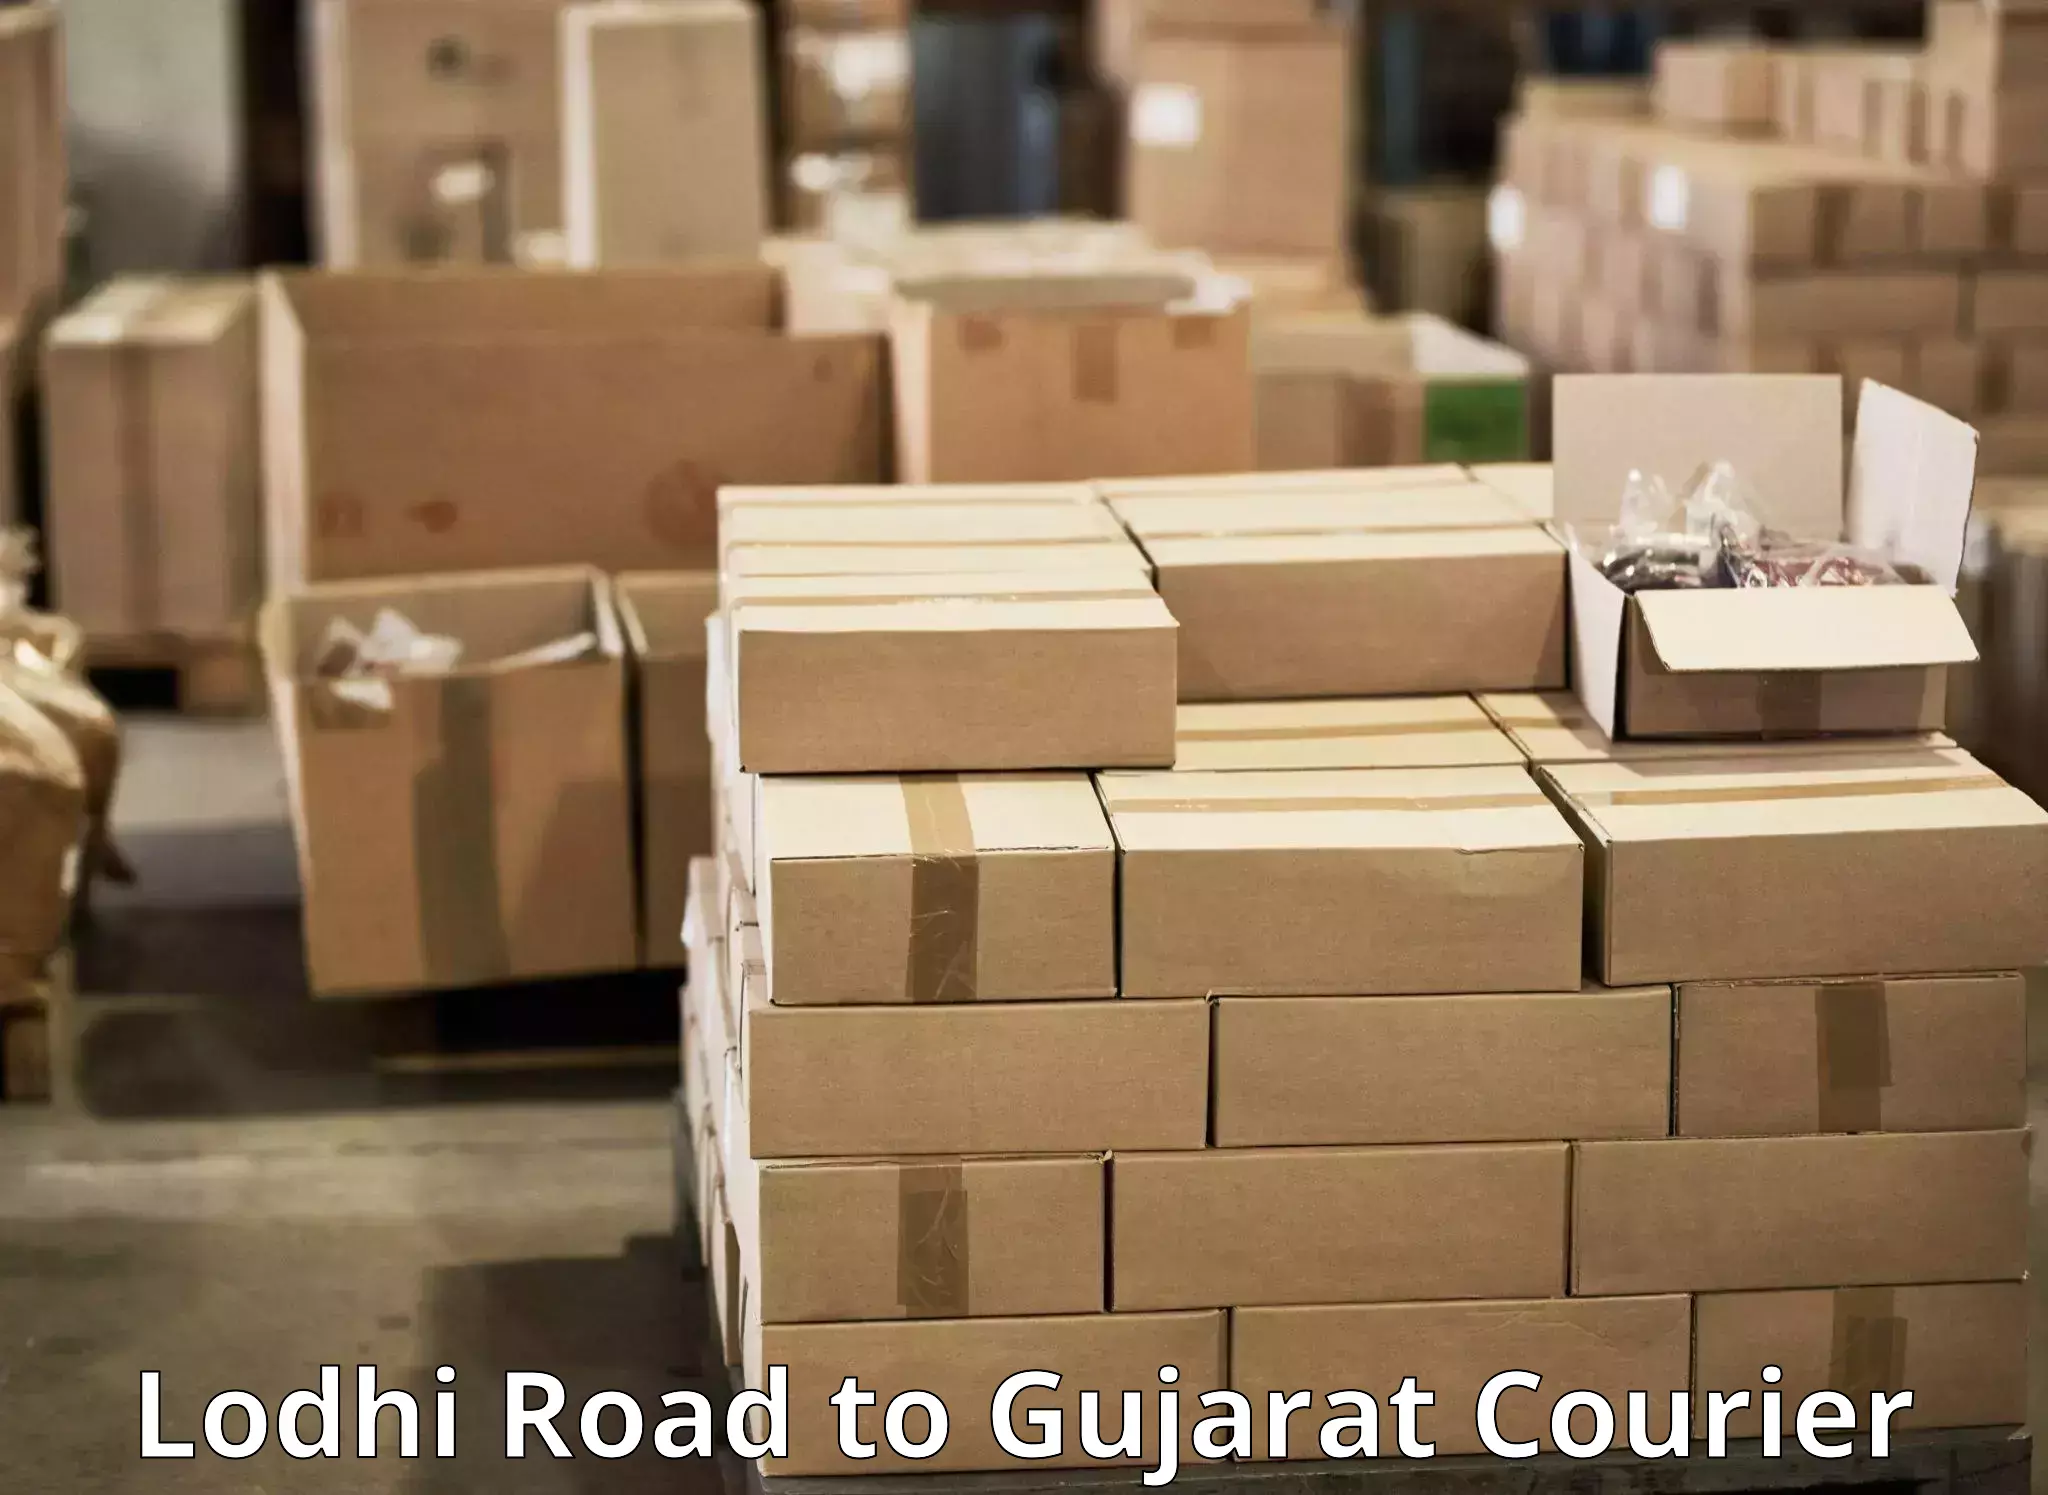 Courier service partnerships Lodhi Road to Keshod